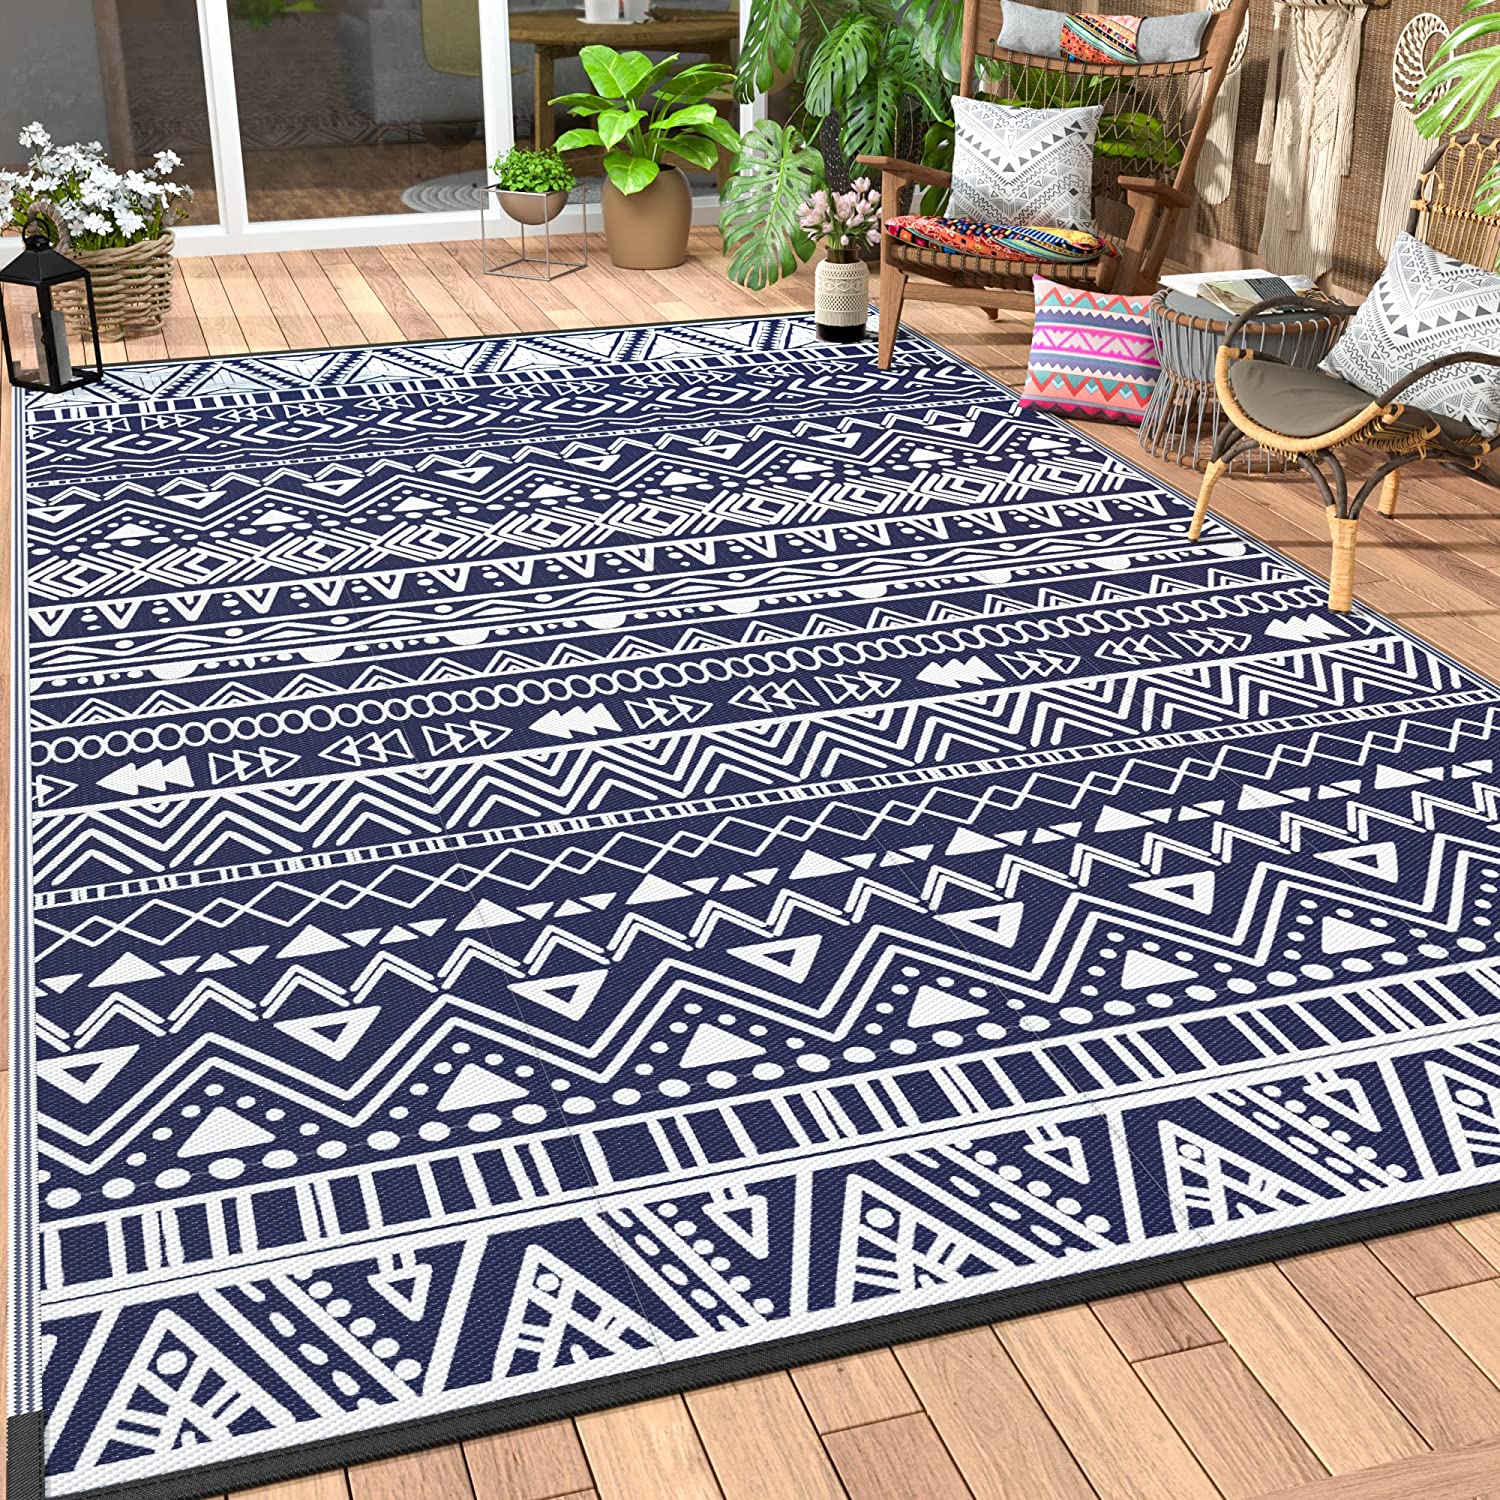 GENIMO Outdoor Rug Reversible 5x8' Patio Rug,Clearance Outside Plastic Waterproof  Mat,Fordable Floor Rug for Patio, Camping, RV, Deck, Porch, Balcony,  Backyard, bluewhite Walmart Canada